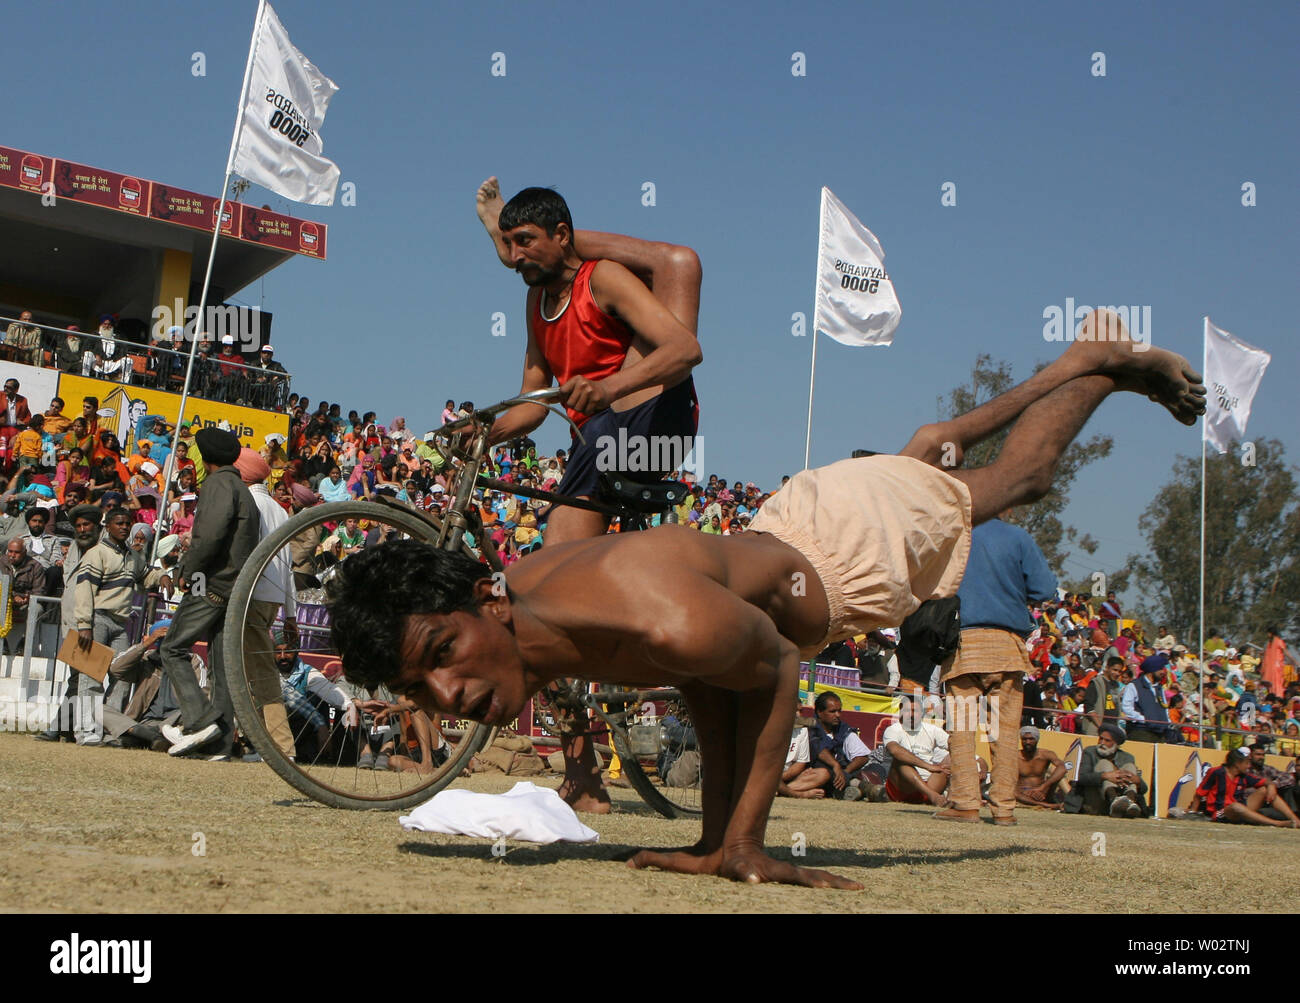 Indian handicapped villagers show their talents during the Kila Raipur Sports festival, also known as the Rural Olympics near Ludhiana on February 9, 2008. The games started in 1933 and take place over a three-day period during which competitors enter various rural sports events including equestrian events, bullock cart races and shows of strength.  (UPI Photo) Stock Photo